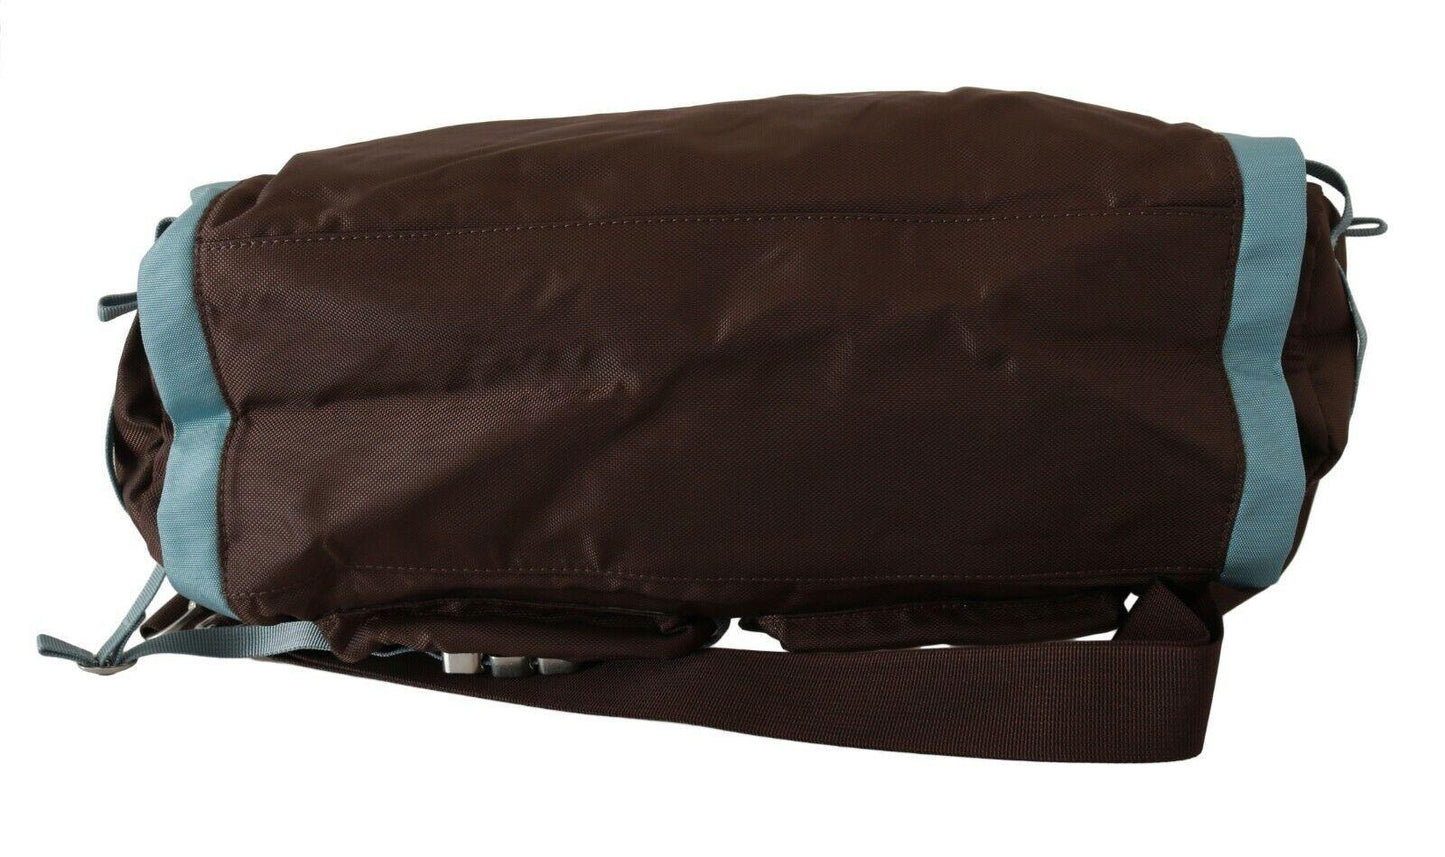 Brown Handbag Duffel Travel Purse - Designed by WAYFARER Available to Buy at a Discounted Price on Moon Behind The Hill Online Designer Discount Store